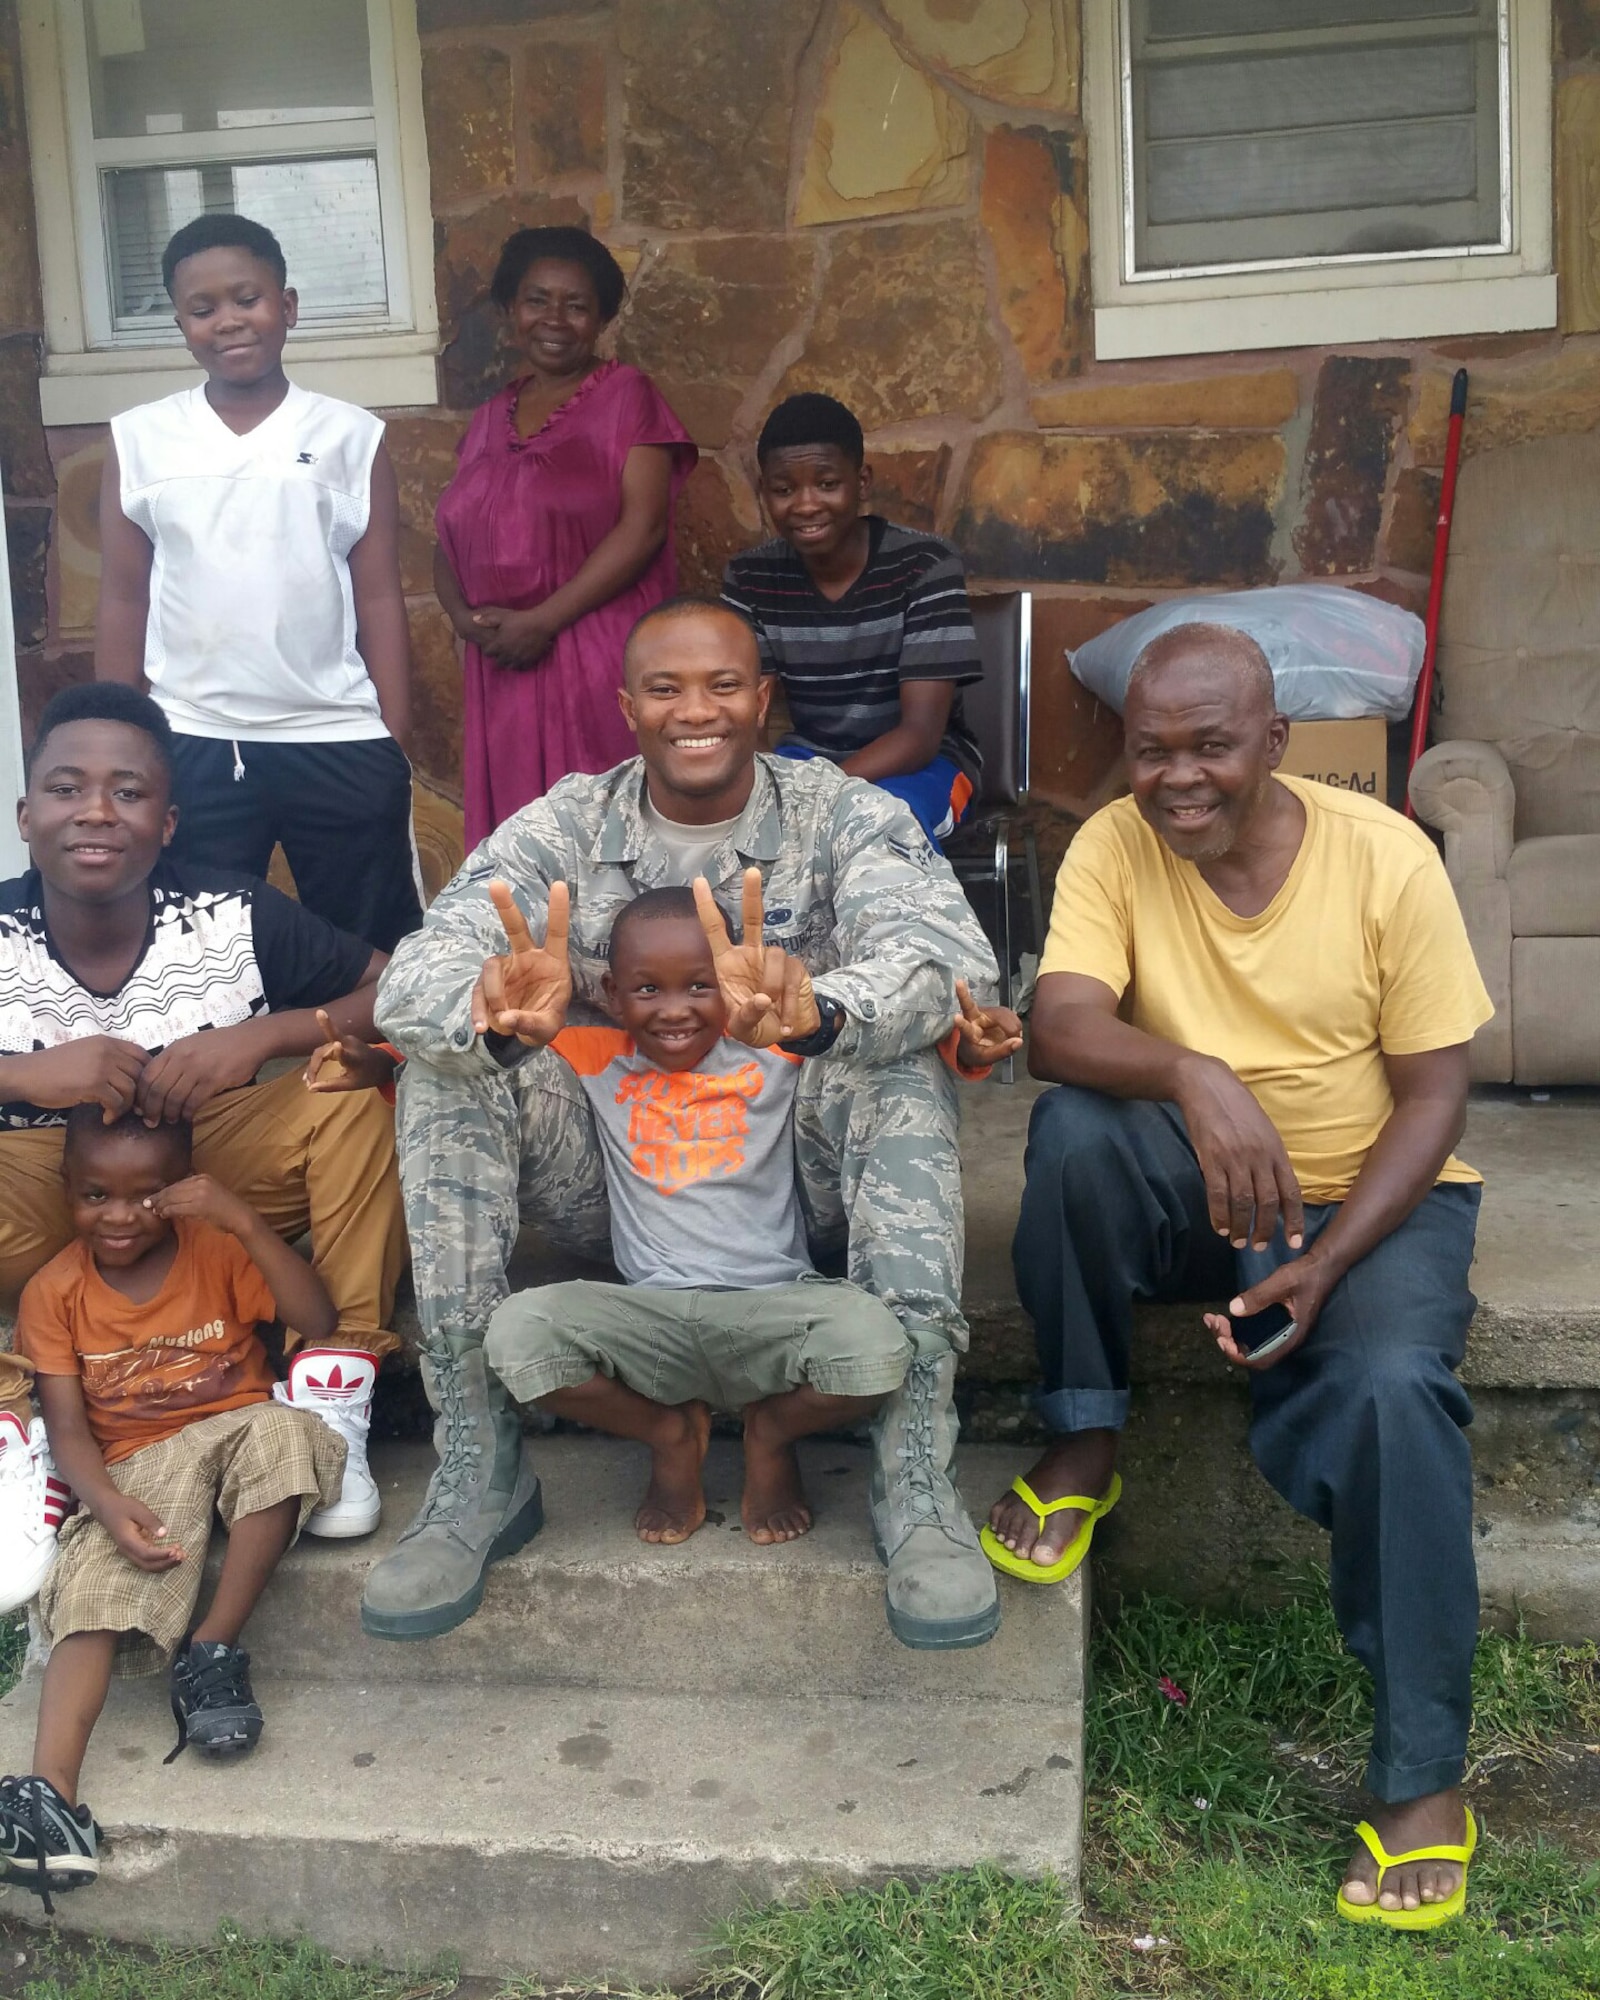 Airman 1st Class Messan Atayi, 22nd Logistics Readiness Squadron mobility Airman, poses for a photo with the Kamoune family in front of their home, Sept. 9, 2016, in Wichita, Kan. The Kamoune Family arrived in the United States in January 2016, as refugees from the Democratic Republic of Congo. (courtesy photo)